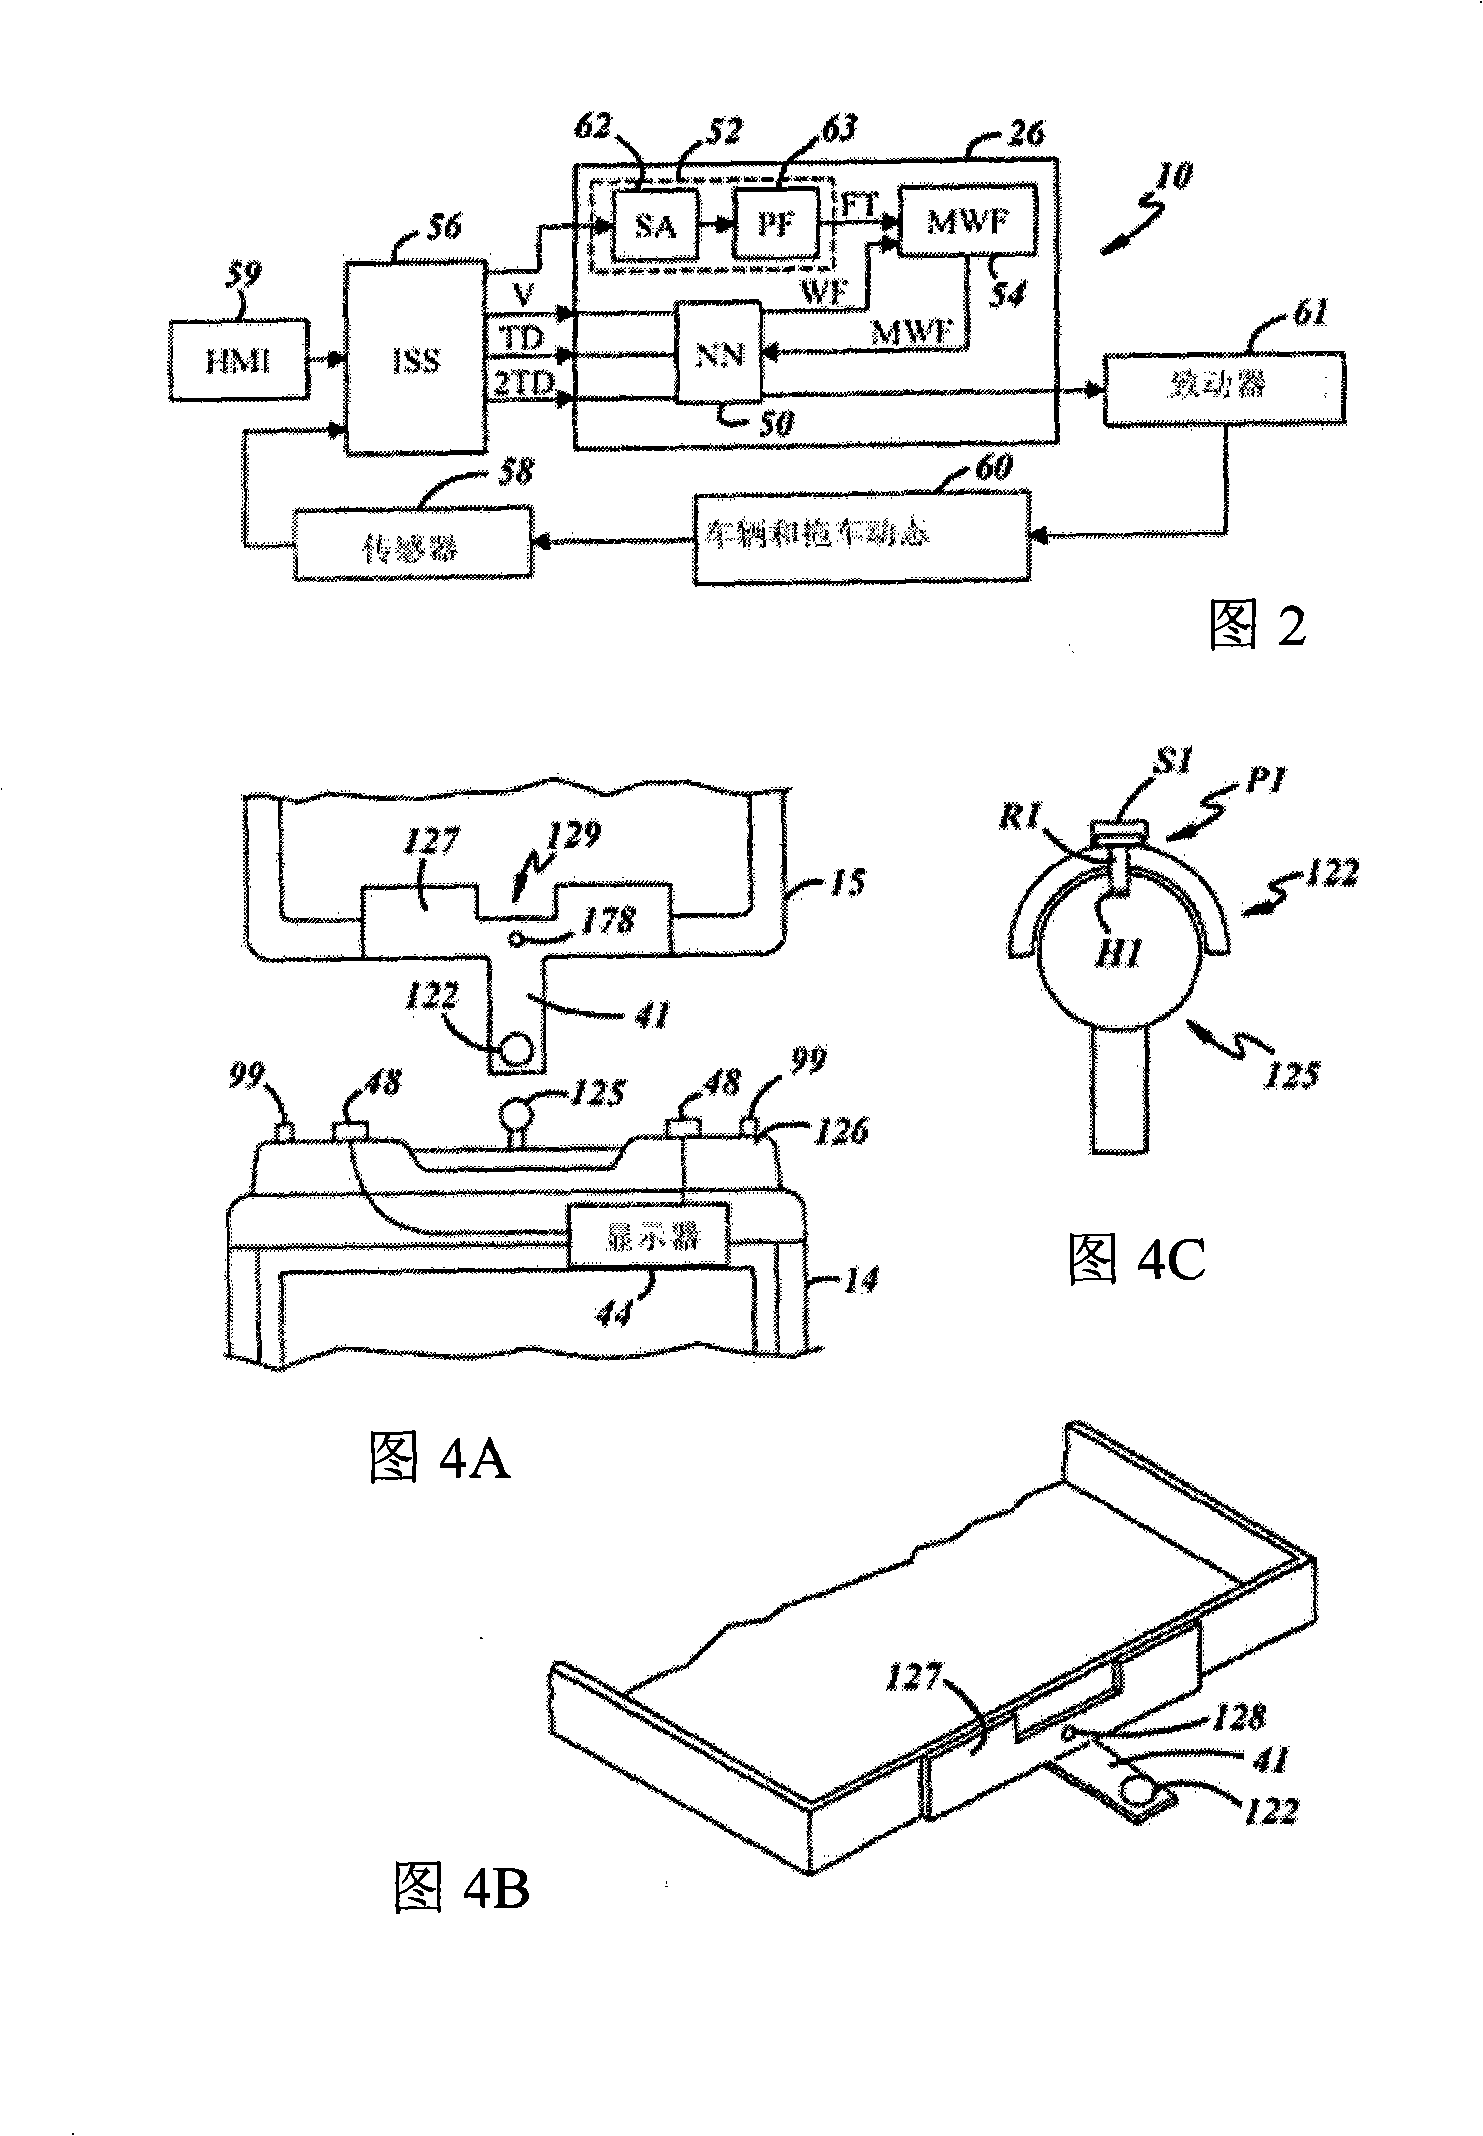 Trailer oscillation detection and compensation method for a vehicle and trailer combination